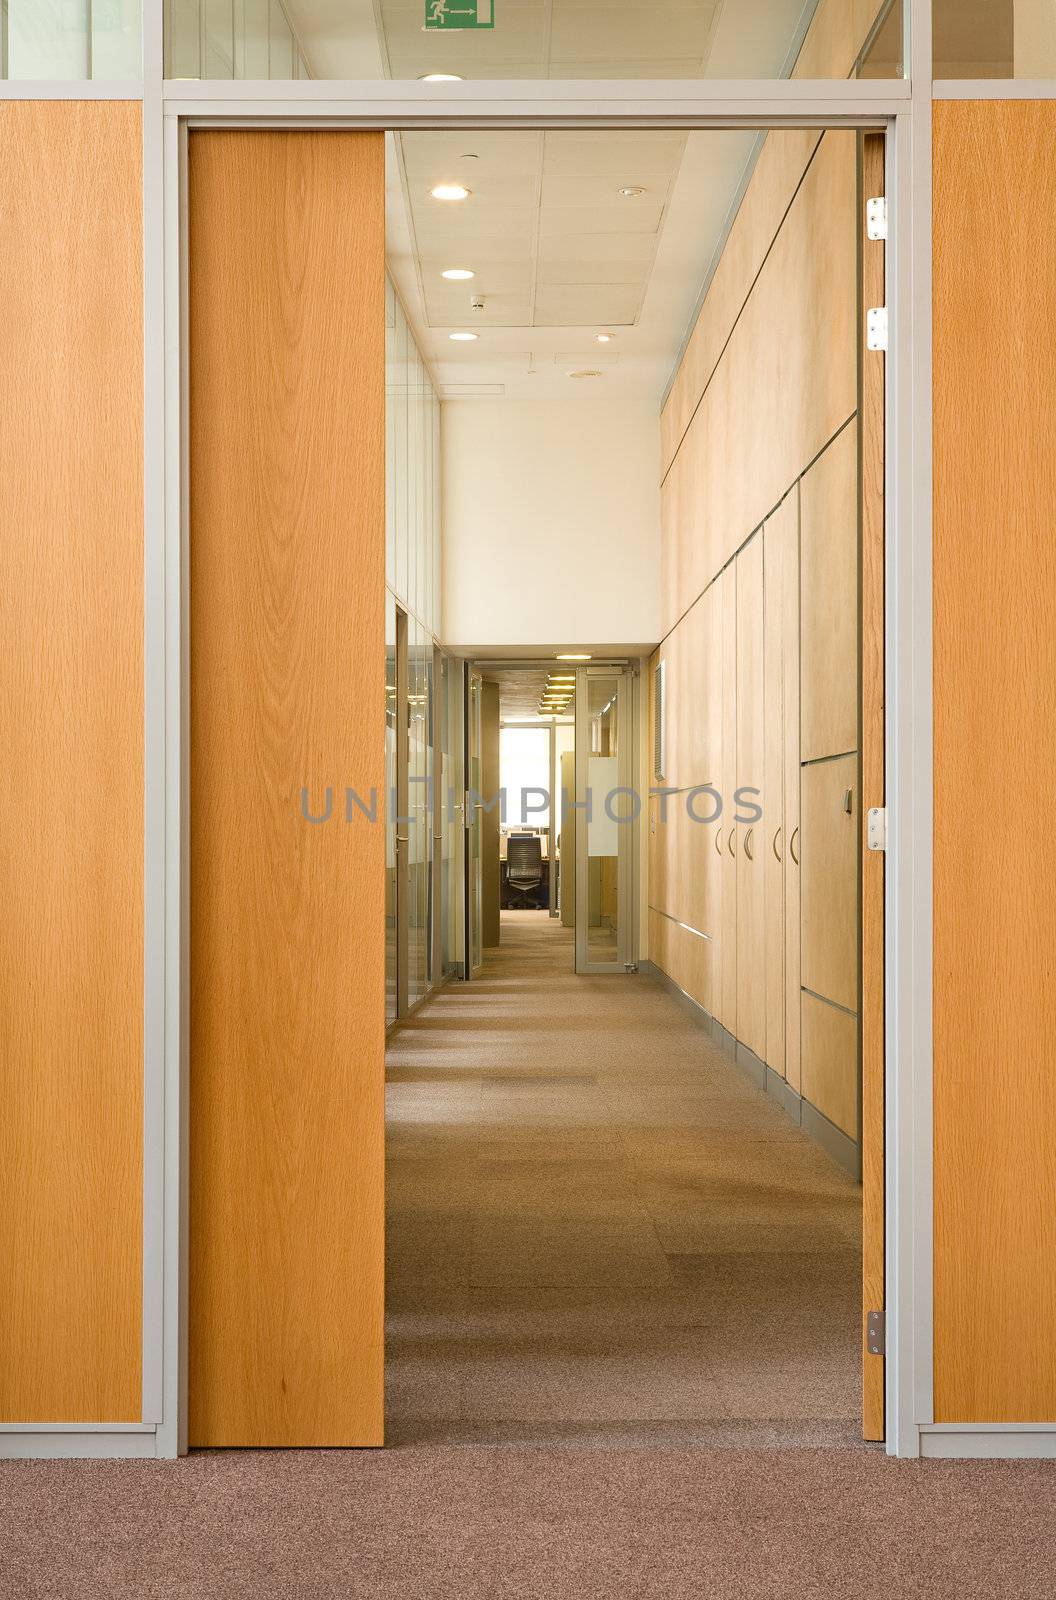 The open door in a long corridor in which other open doors in office centre are visible
